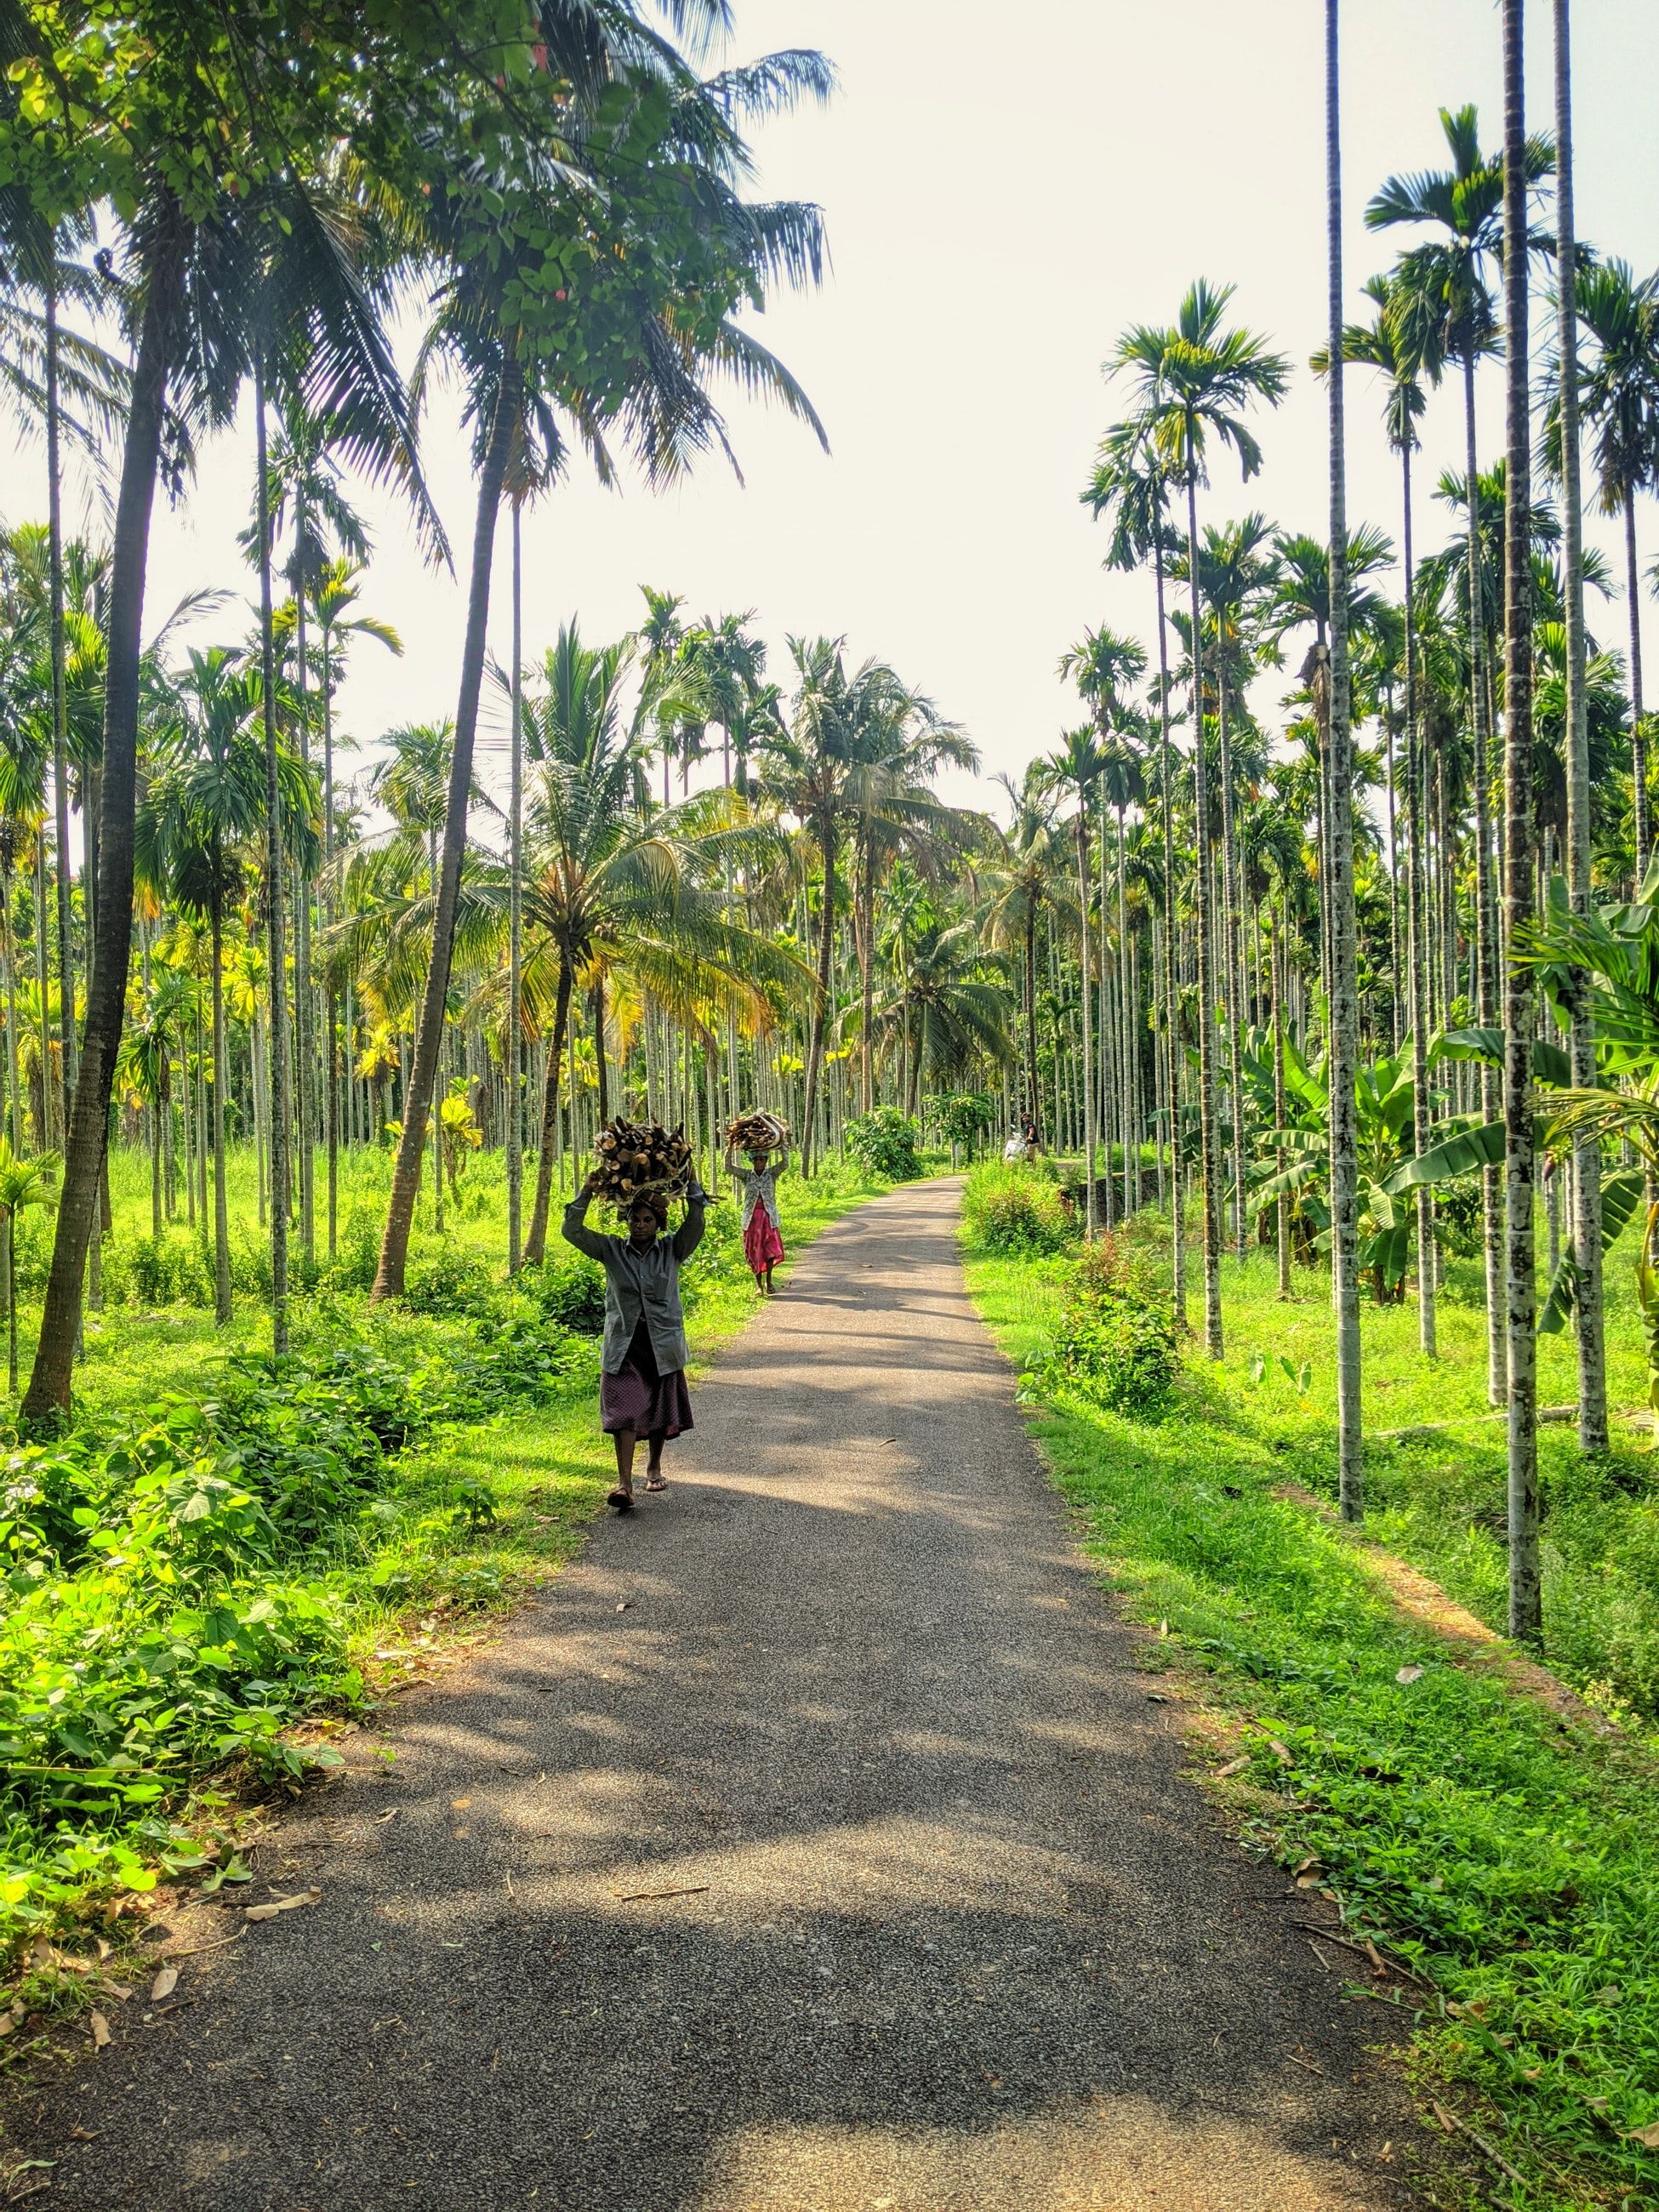 Kerala, An Indian God’s Own Country Where Life Embraces Nature And Capital Of The World's First Martial Art